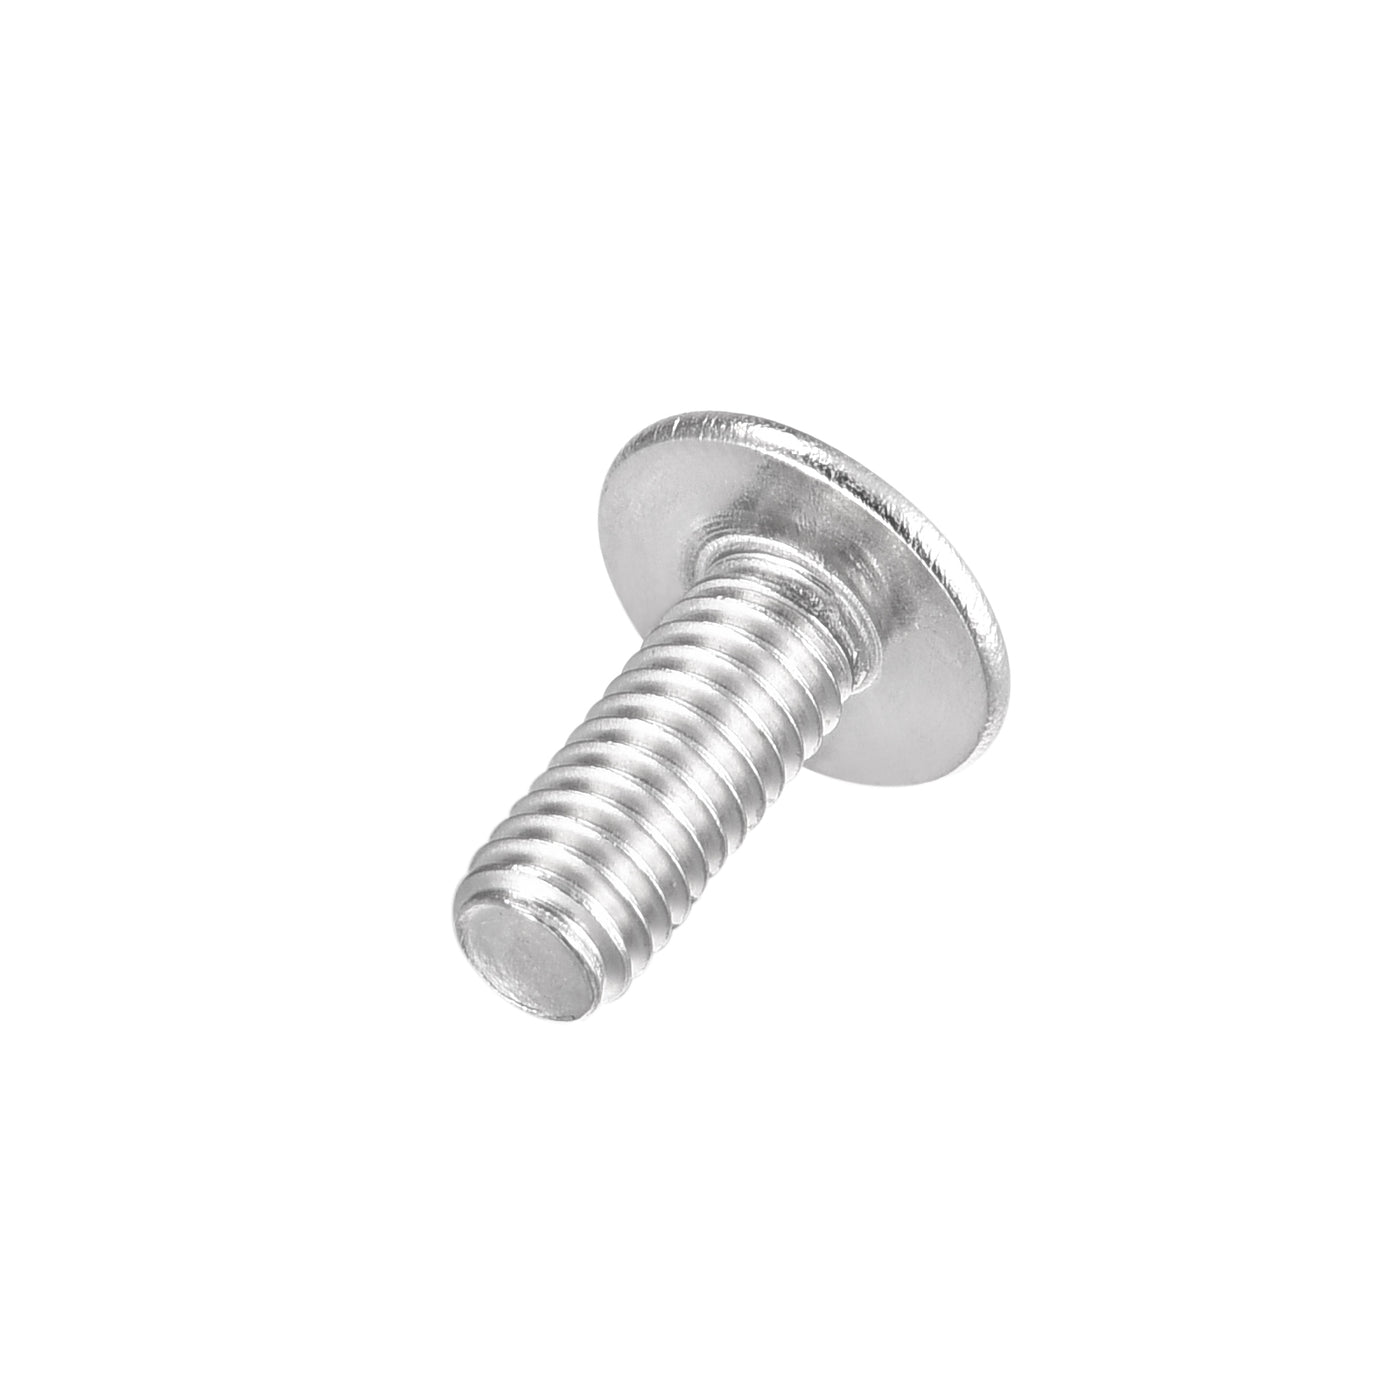 Uxcell Uxcell M4x18mm 304 Stainless Steel Flanged Button Head Socket Cap Screws 50pcs